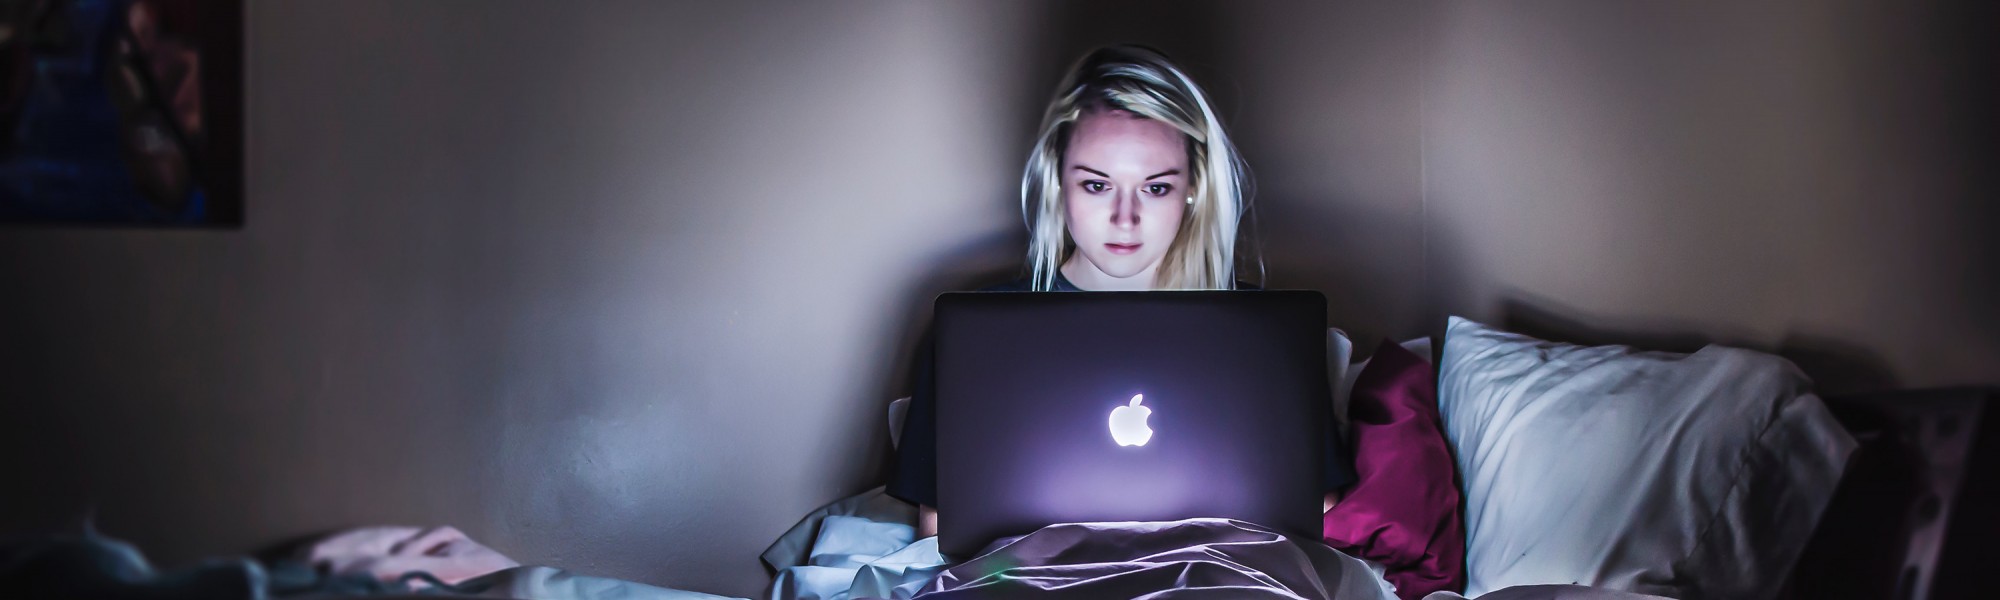 Worried girl looks at her computer in bed.